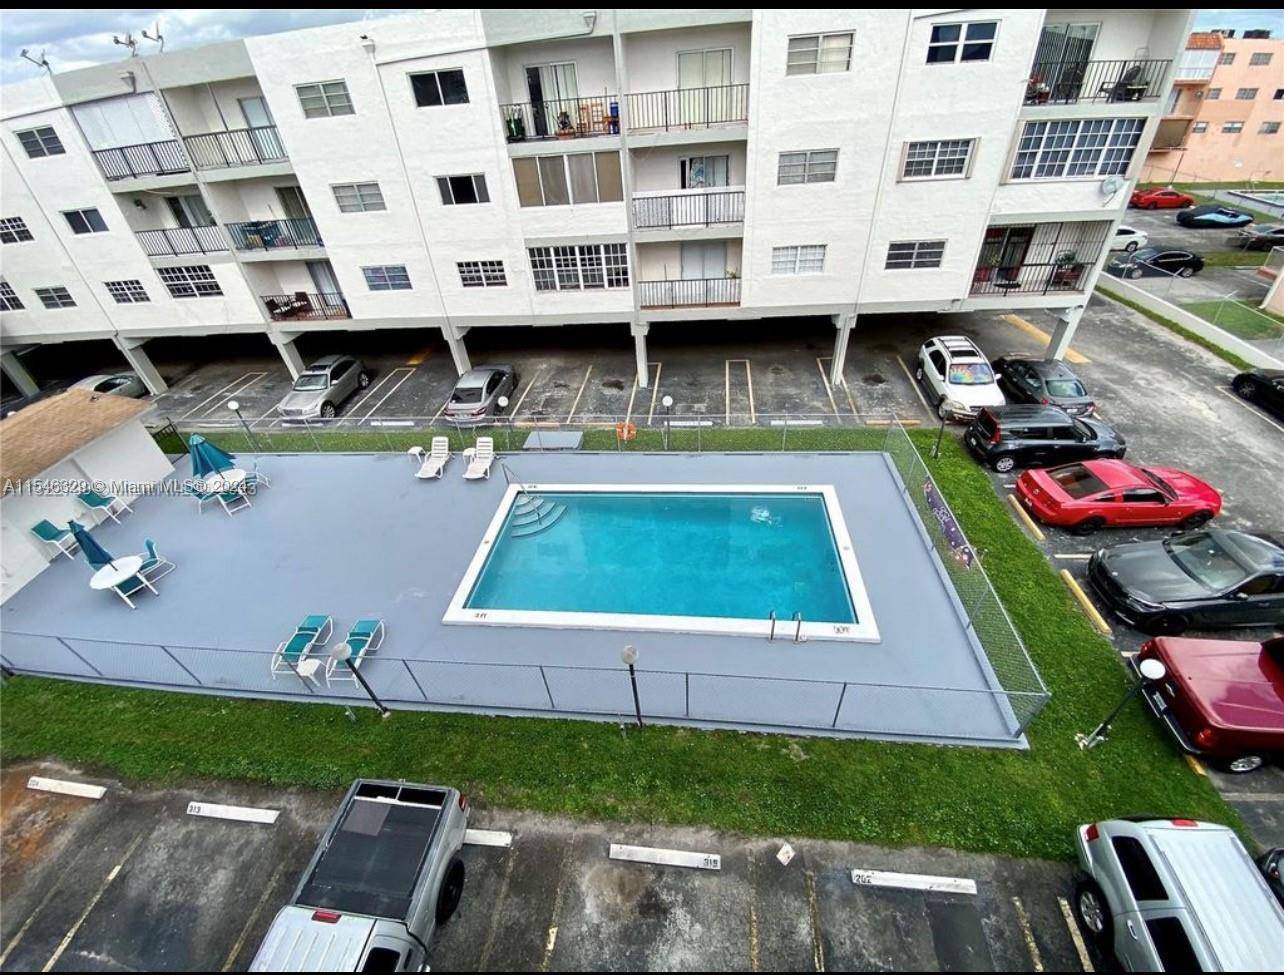 Beautiful 2 bedrooms 2 bathroms apartment, recently renovated, located in heart the Hialeah.